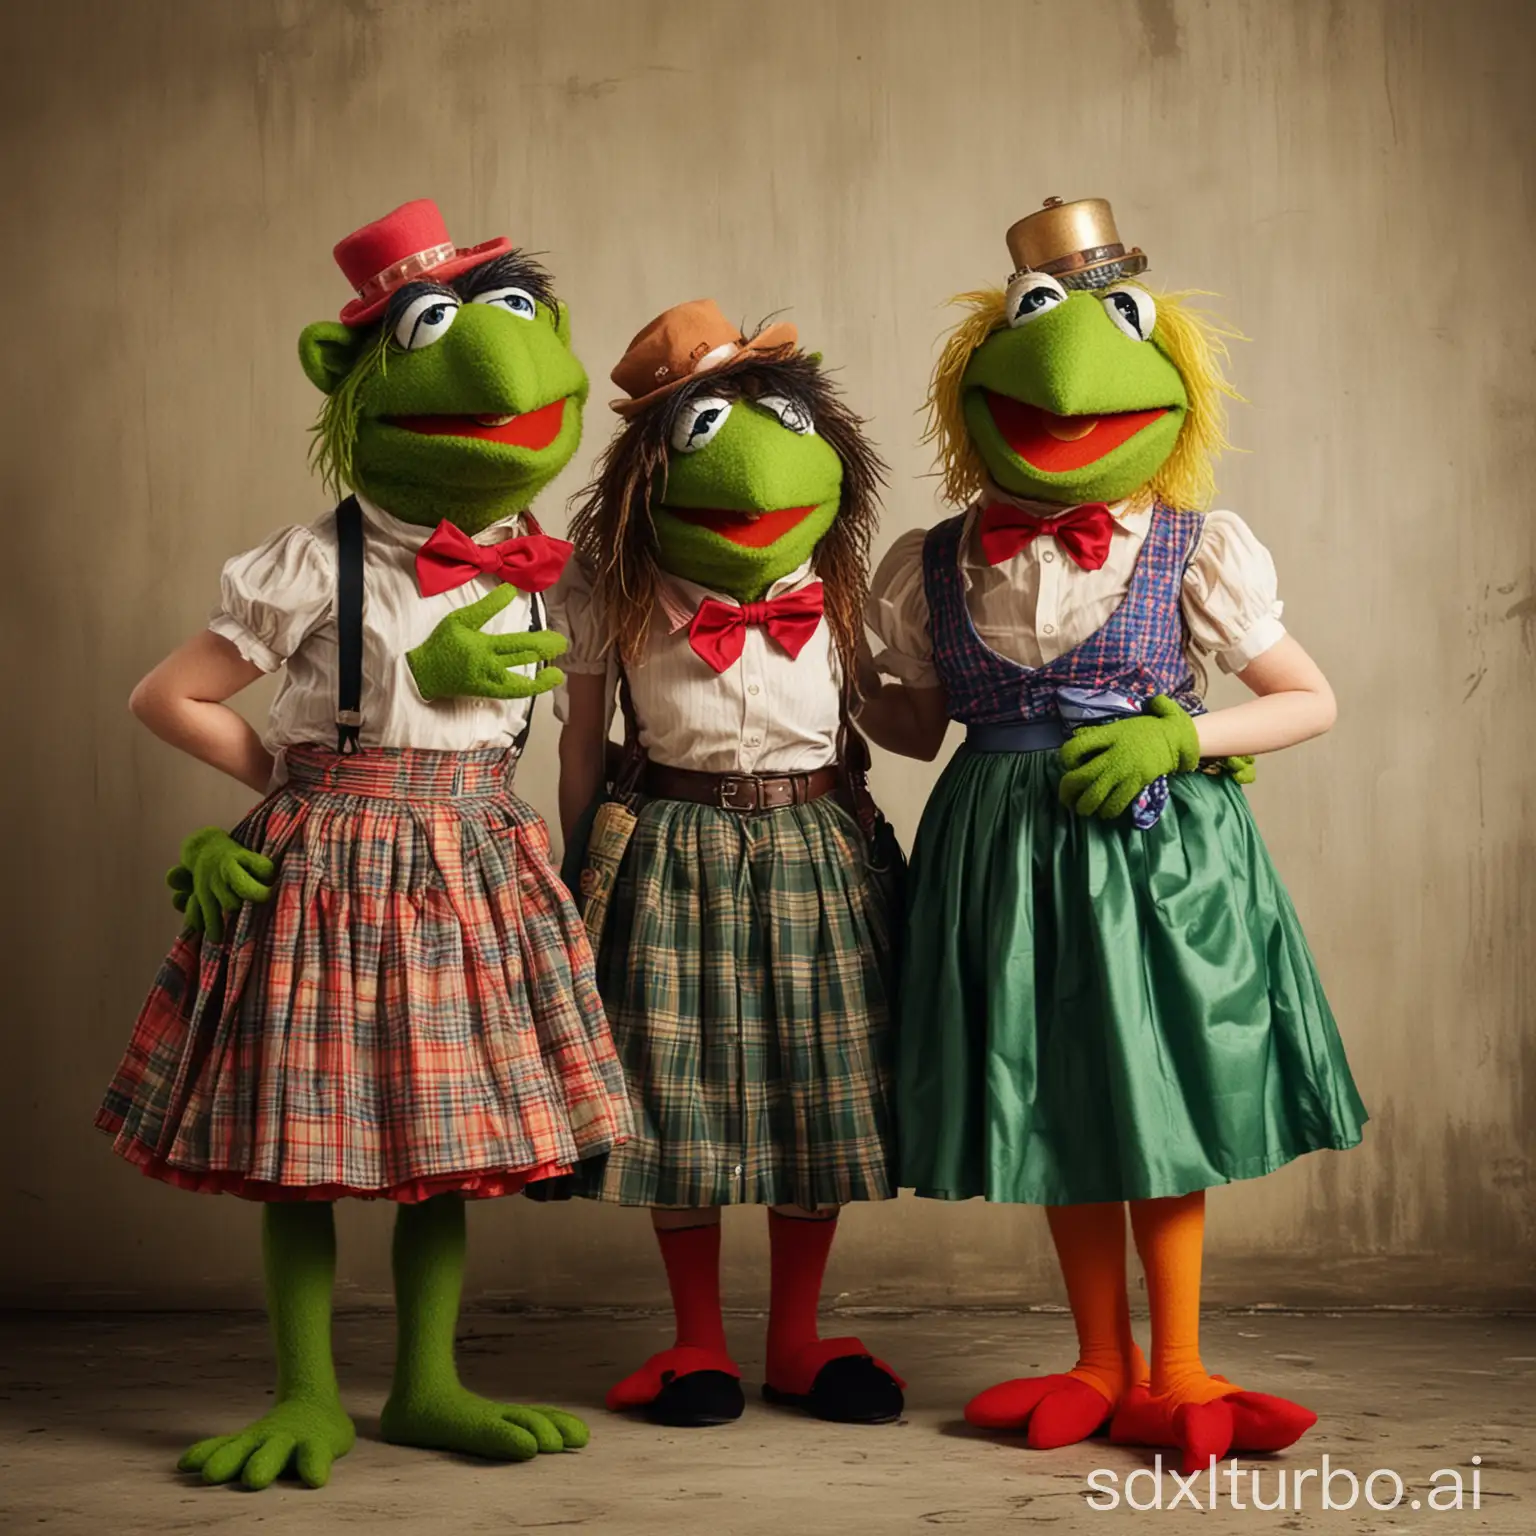 Playful-Muppets-in-Colorful-Skirts